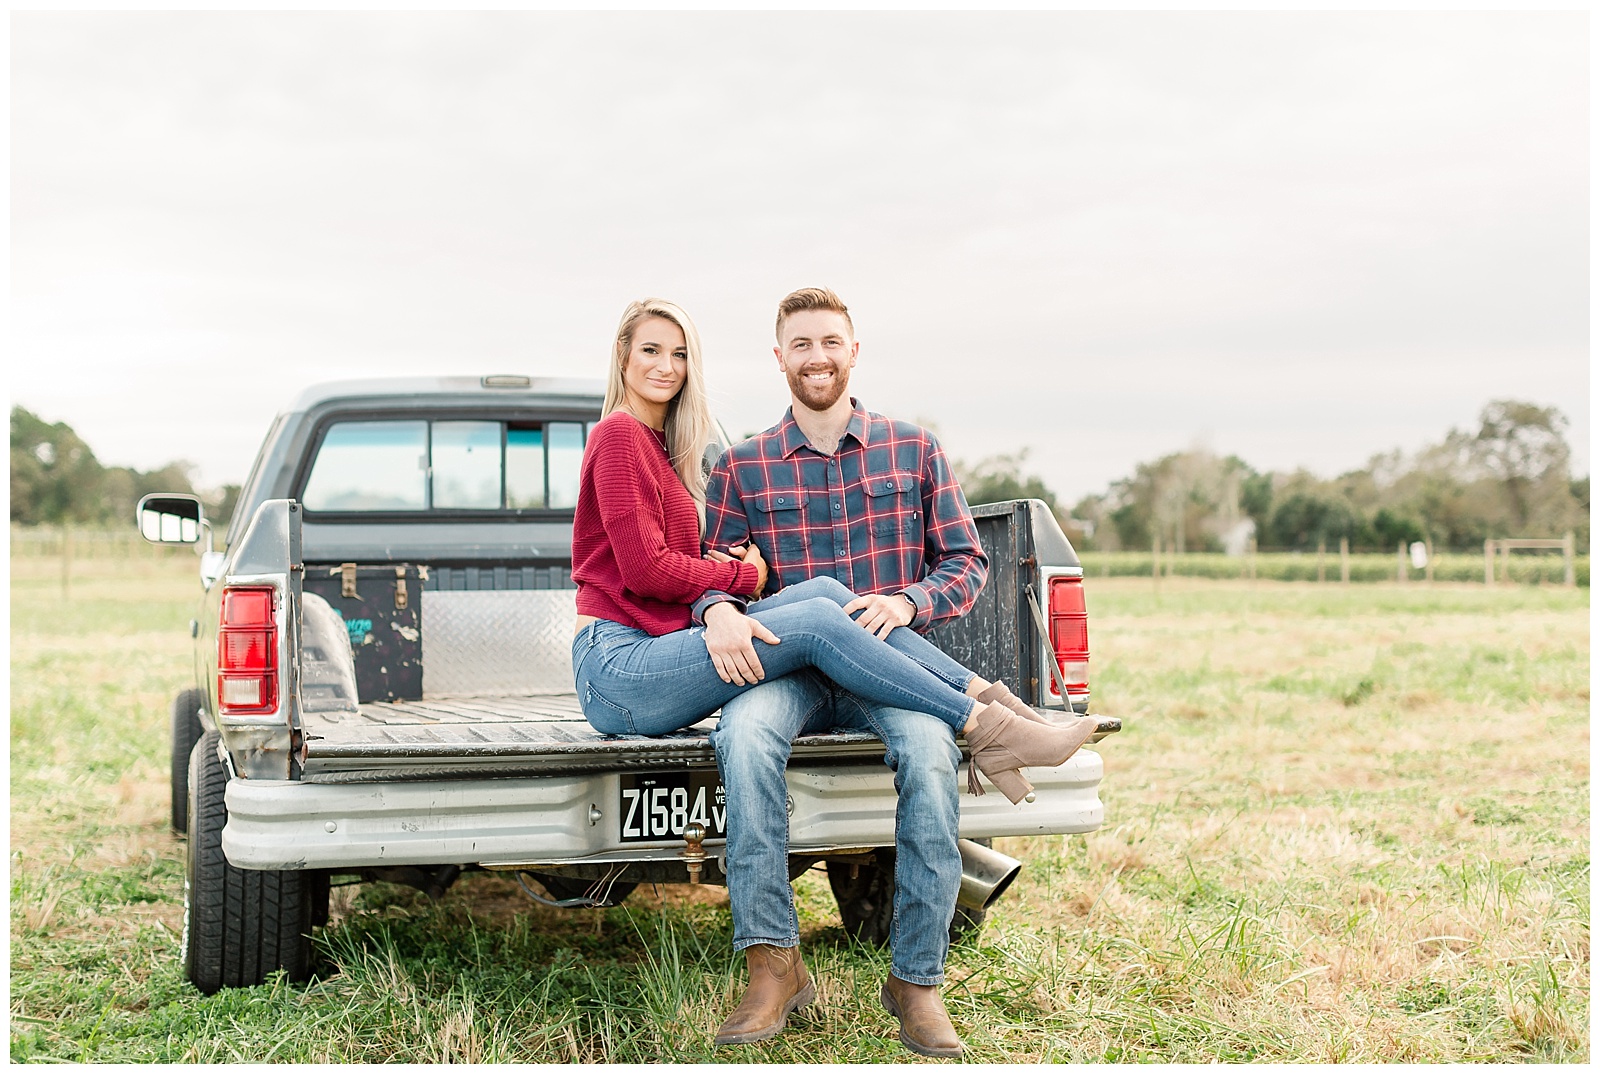 cullipher-farms-engagement-session-42.jpg